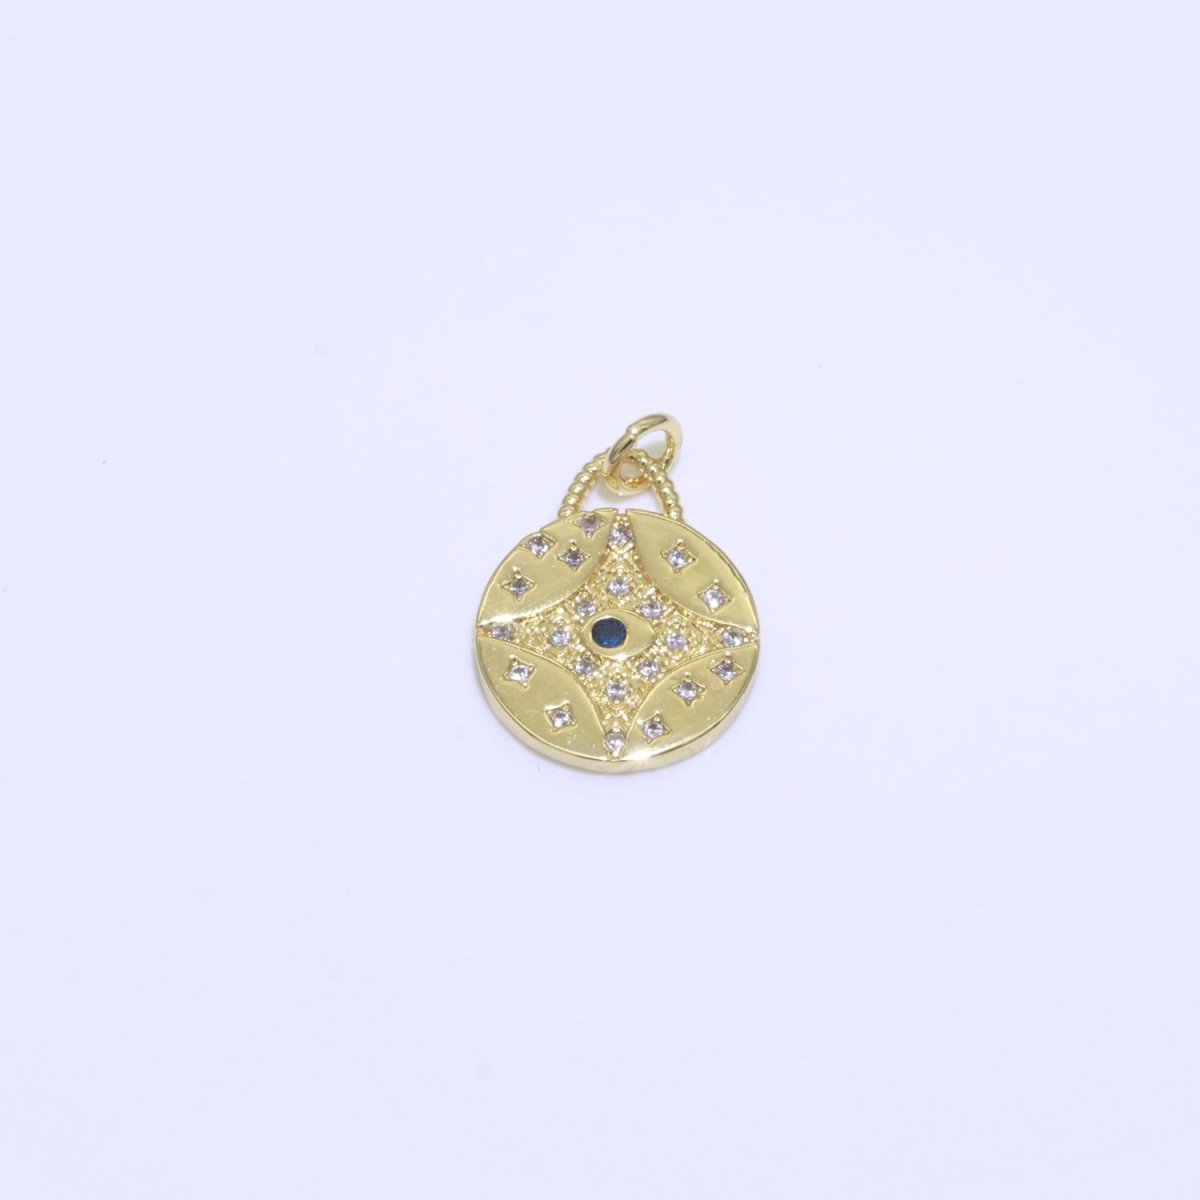 CZ Micro Pave Star Evil Eye Star on Coin Round Shape Pendant Charm Micro Pave Dainty Gold Charm for Necklace Bracelet Earring Supply M-418 - M-420 - DLUXCA